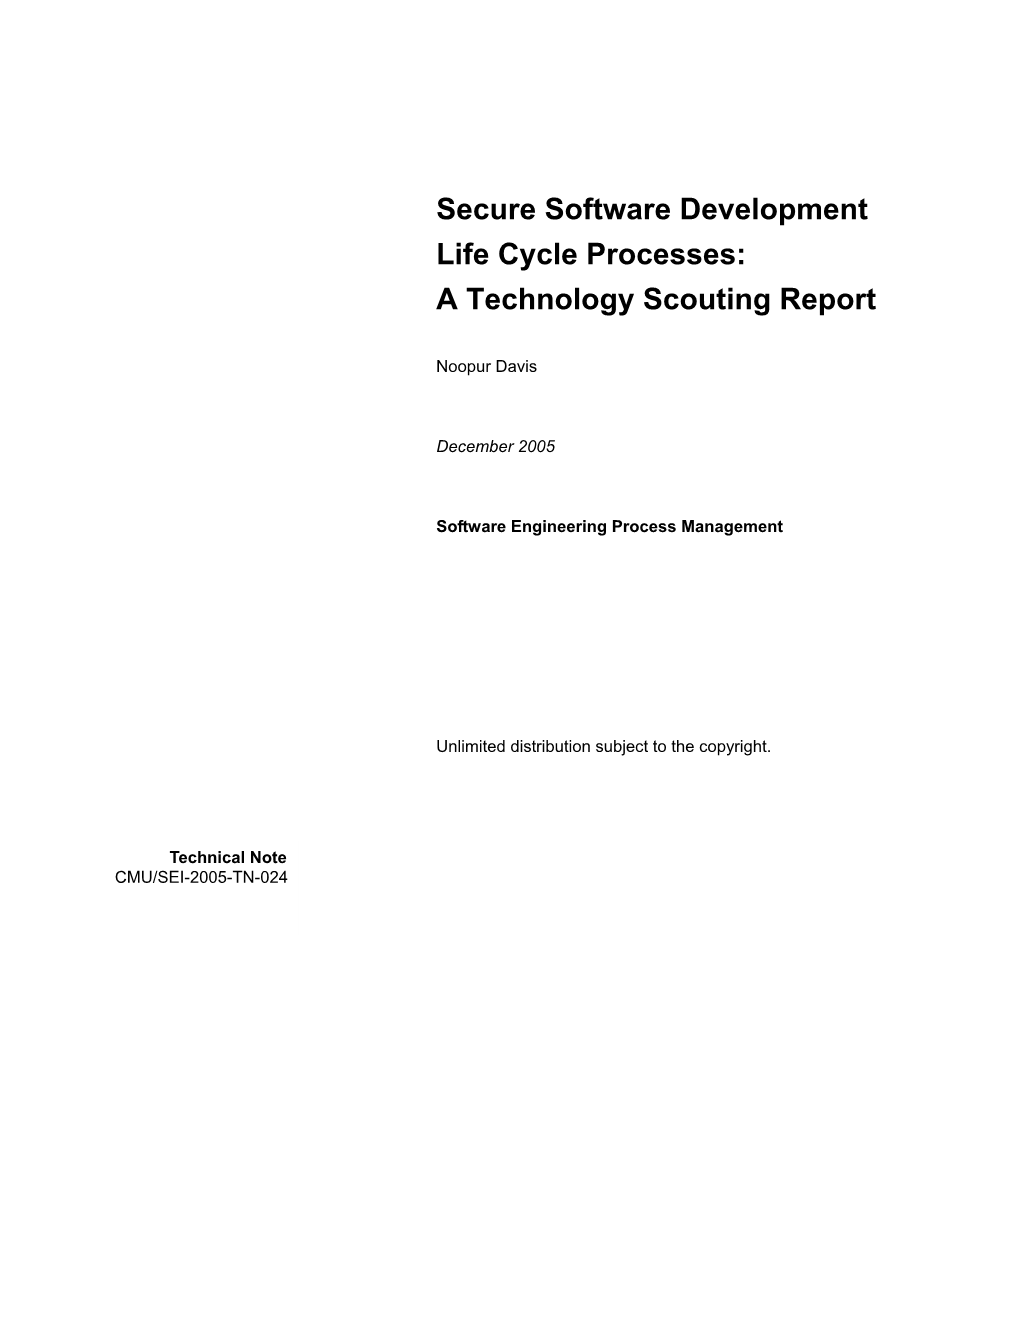 Secure Software Development Life Cycle Processes: a Technology Scouting Report